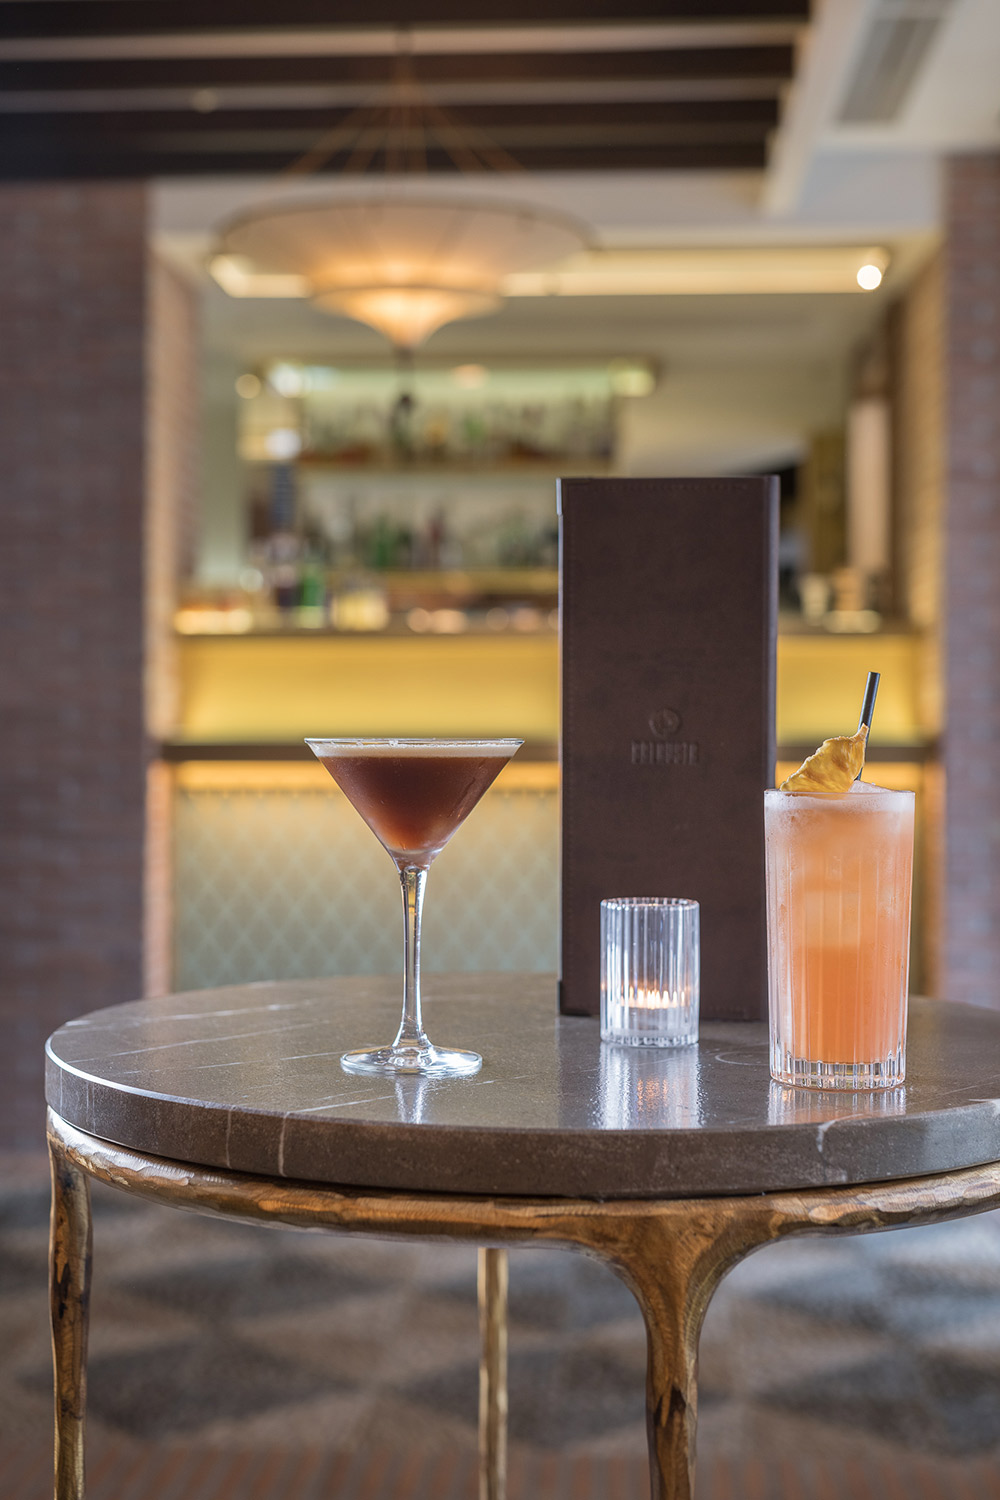 Tradition and originality also feature in our Cocktail Bar, with a selection of classic and signature cocktails. Open daily from 12.30 pm to 12.00 am.